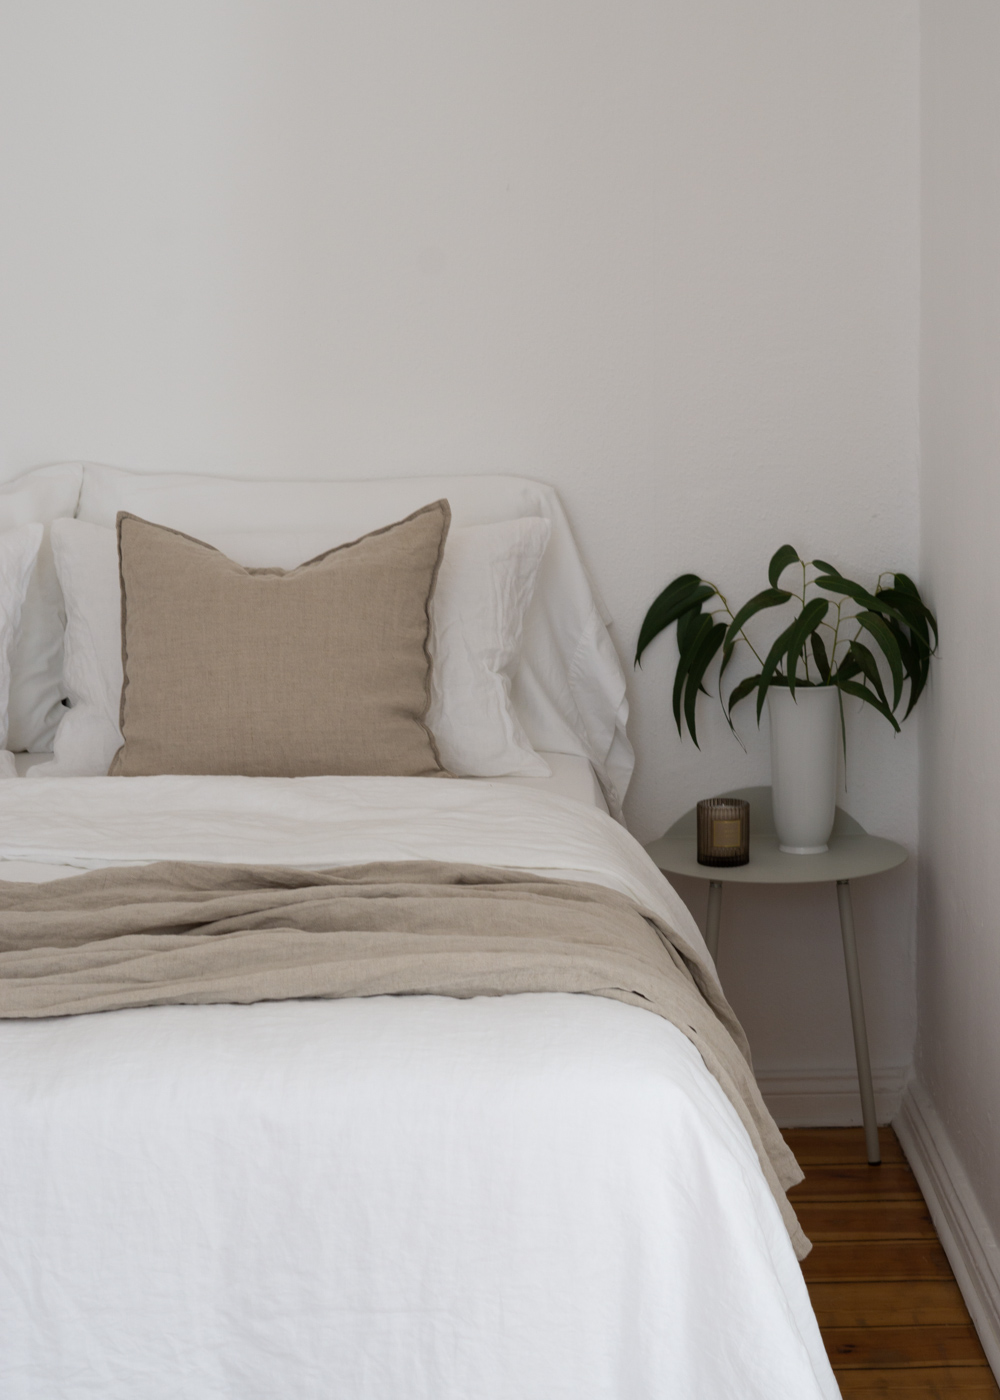 H&M Home, Beige Linen Bedding, Bedroom Style - Neutral Home, Scandinavian Interior, Natural Aesthetic, Minimalist Decor, Beige Style, RG Daily Blog